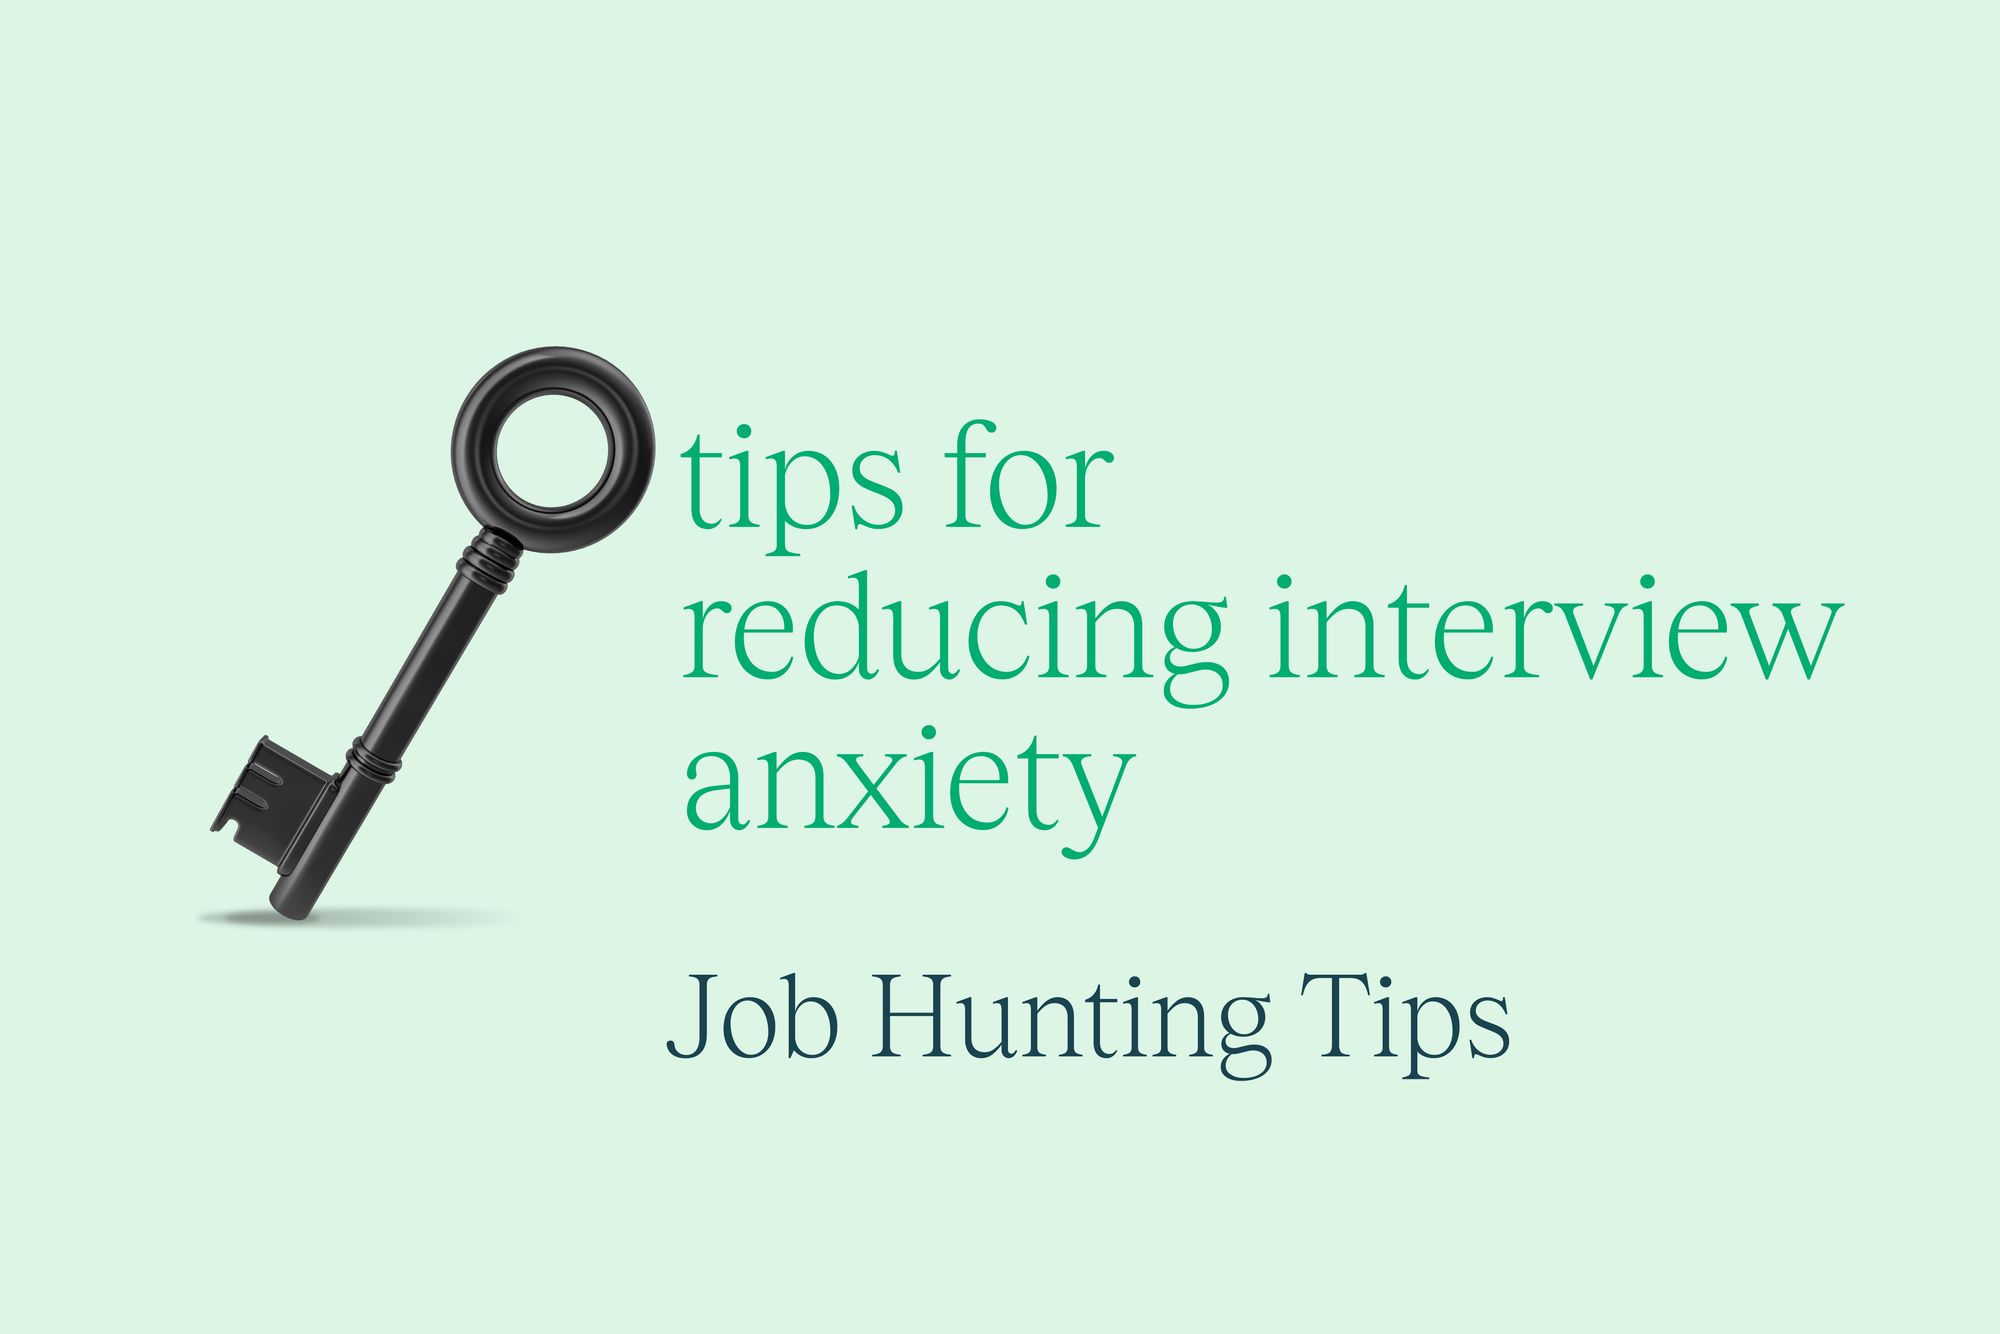 3 tips for reducing interview anxiety